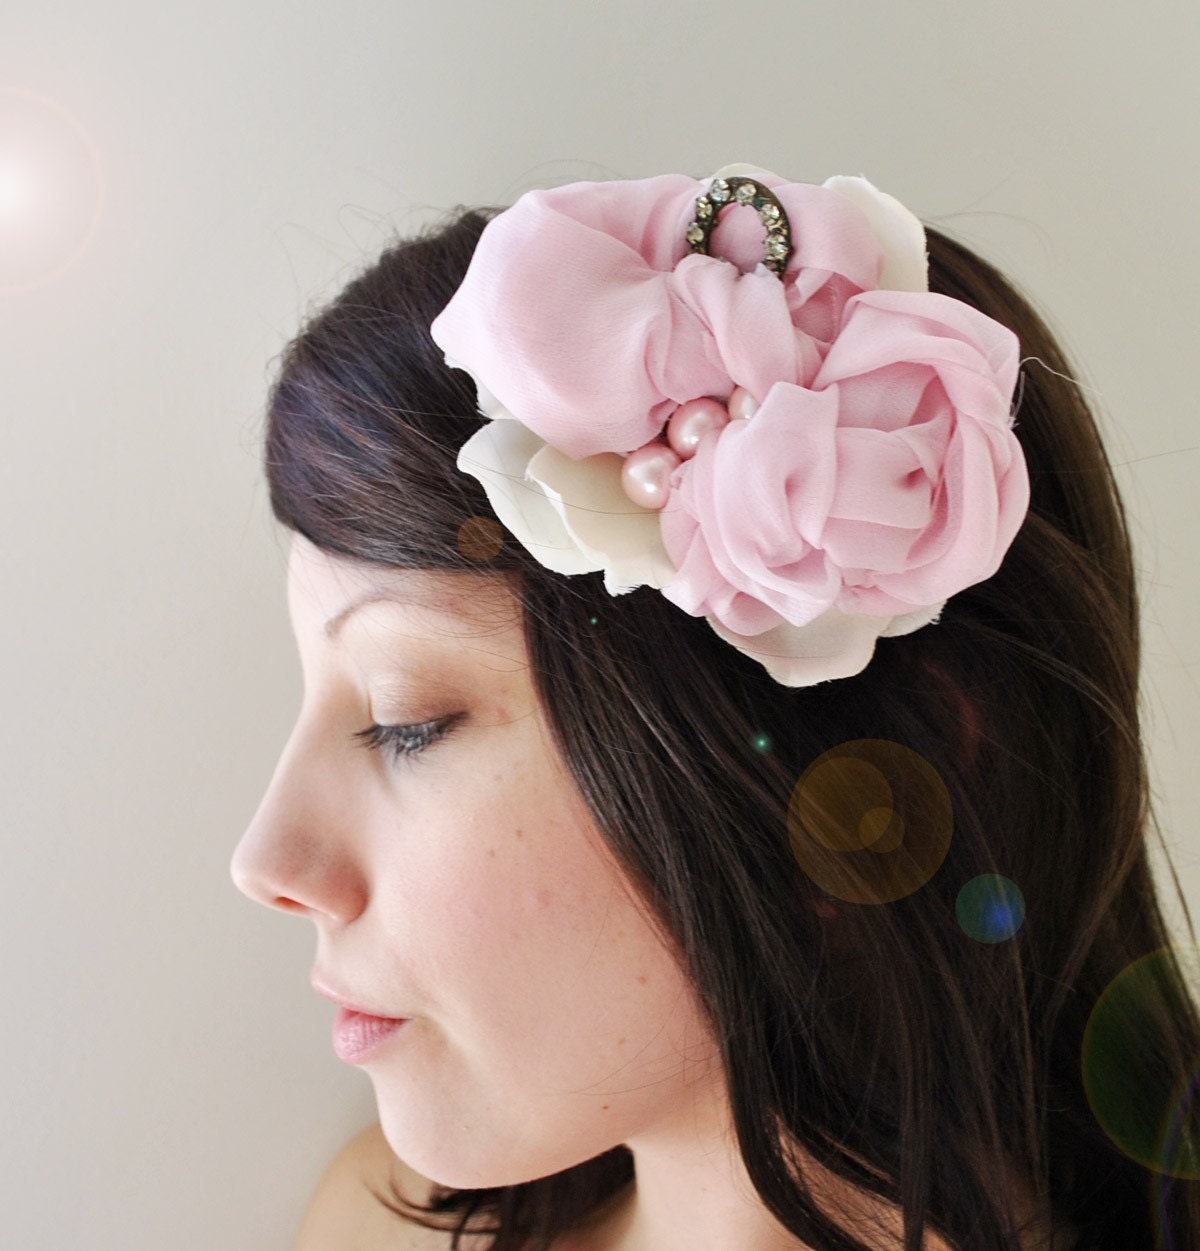 stuff and nonsense - whimsical hair comb